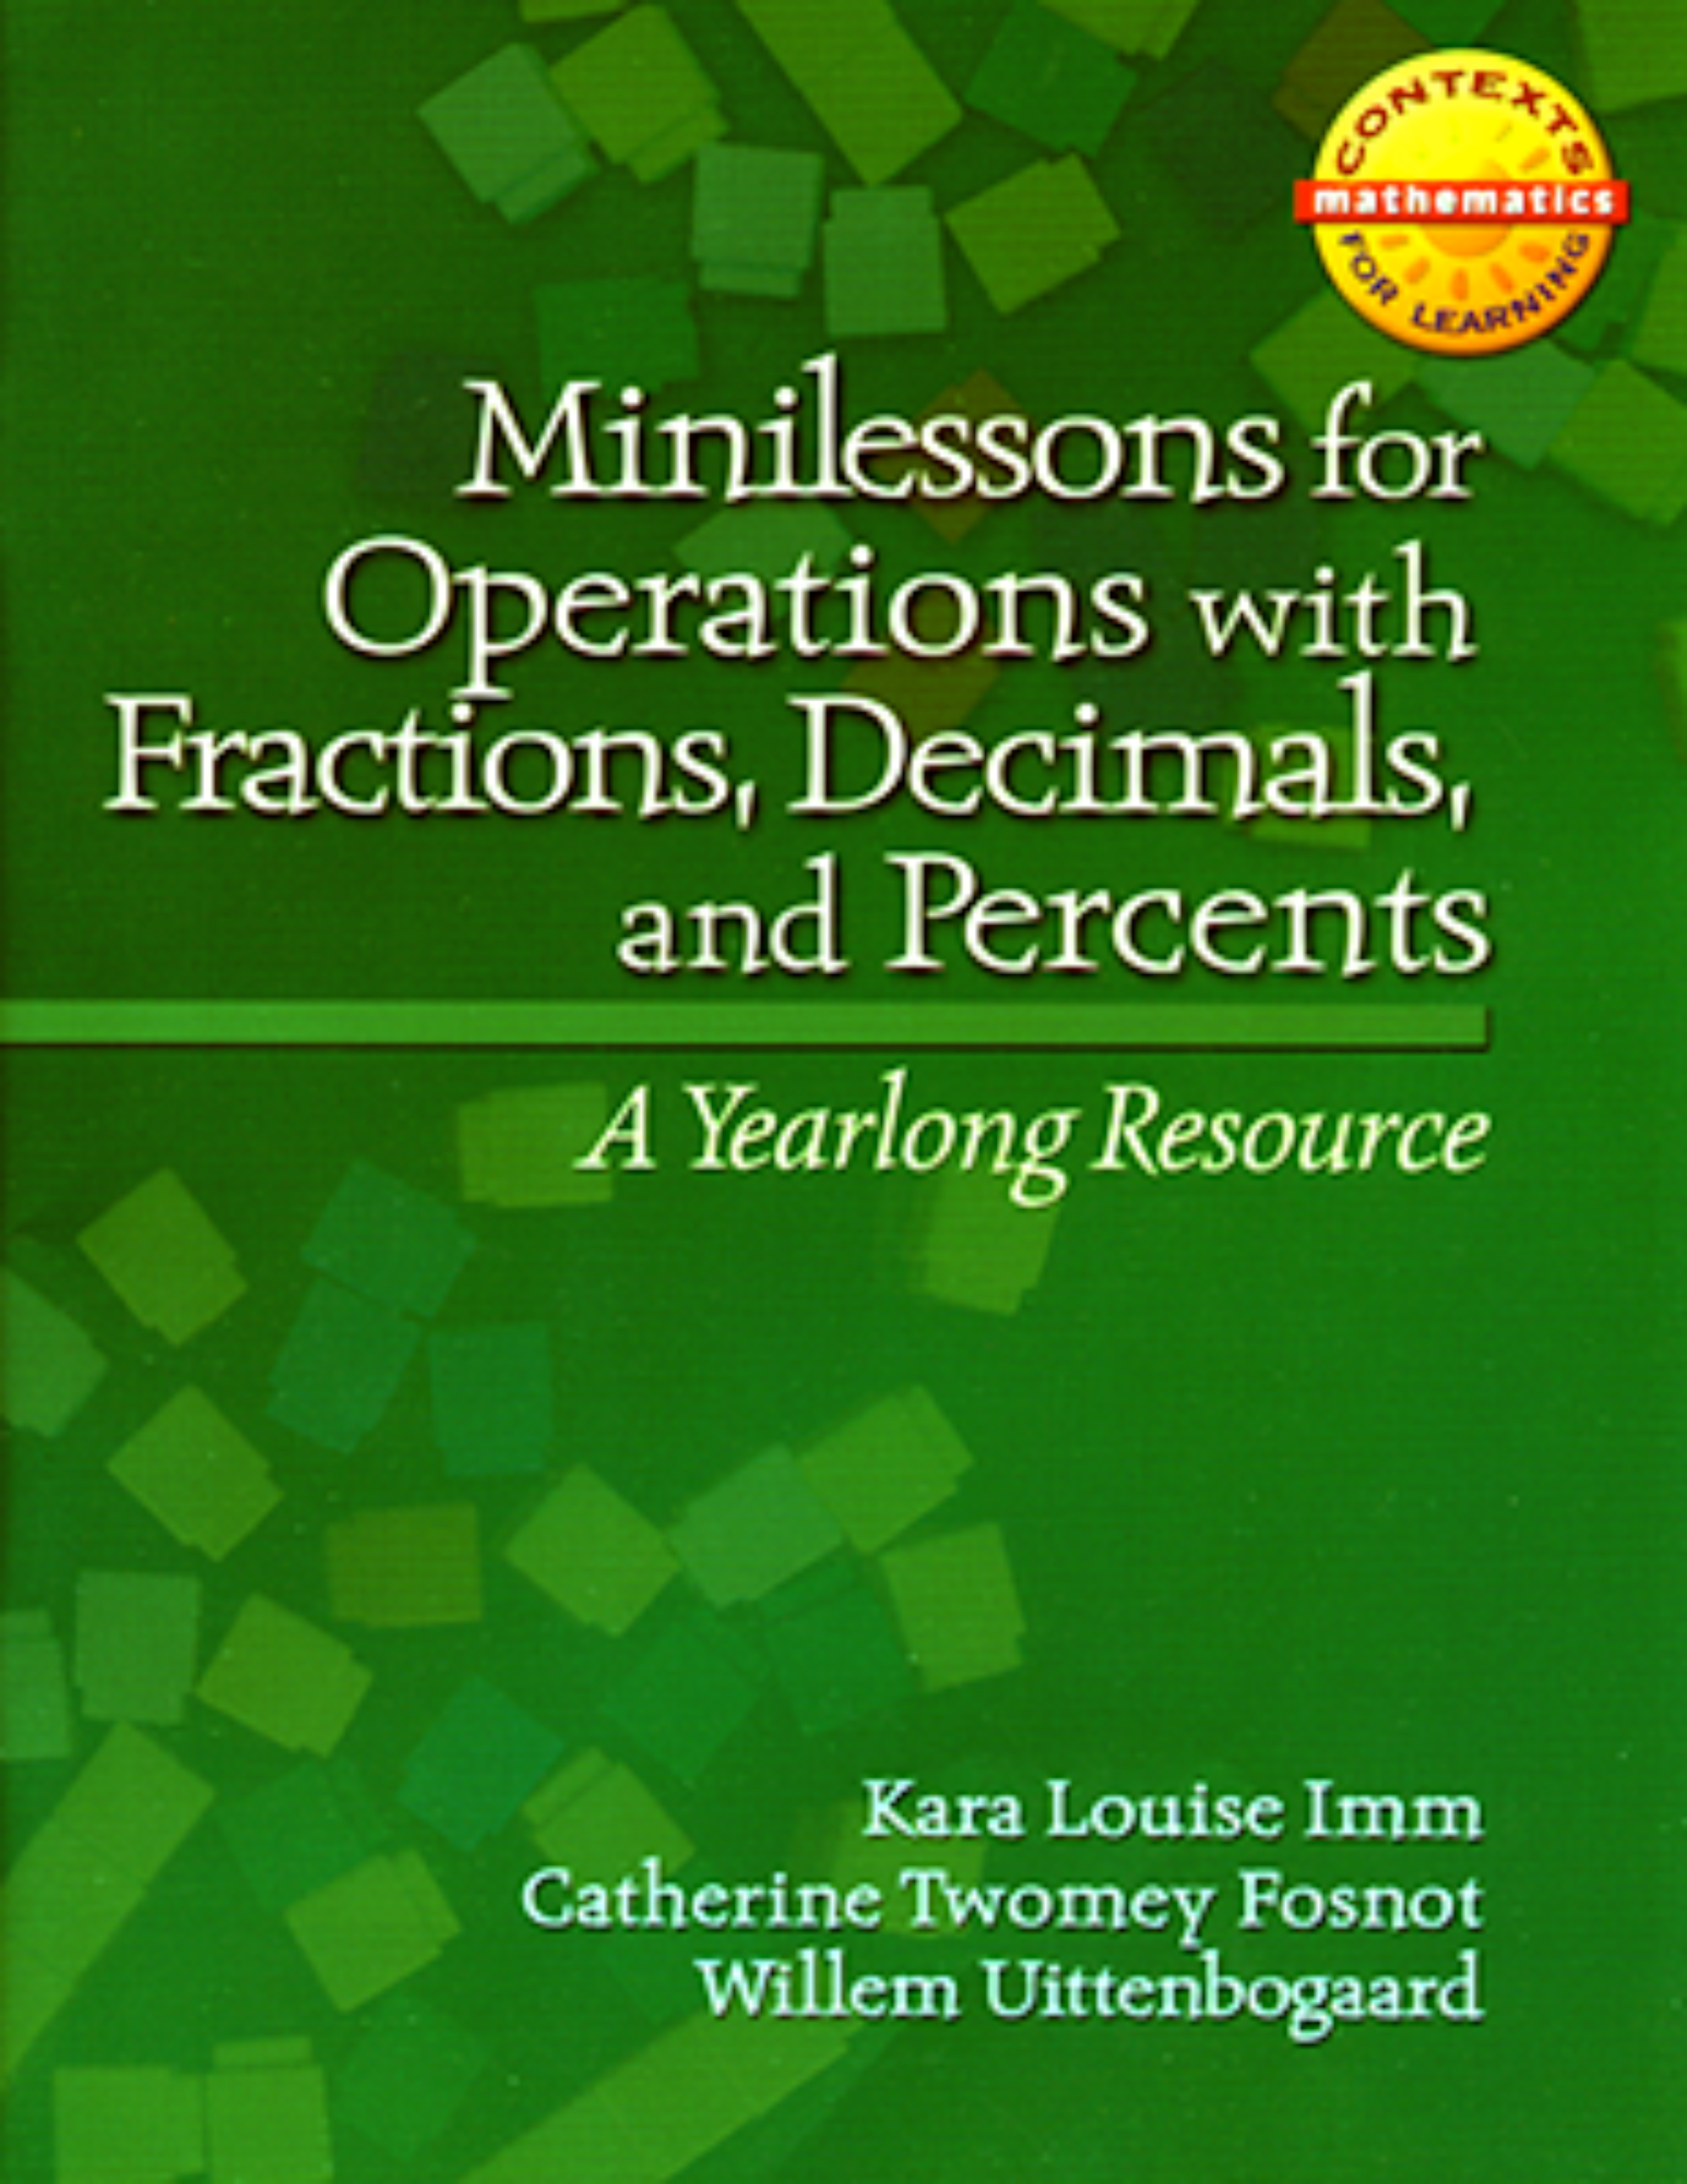 Percents　Fractions　with　Operations　for　Minilessons　on　Perspectives　–　Decimals　New　and　Learning